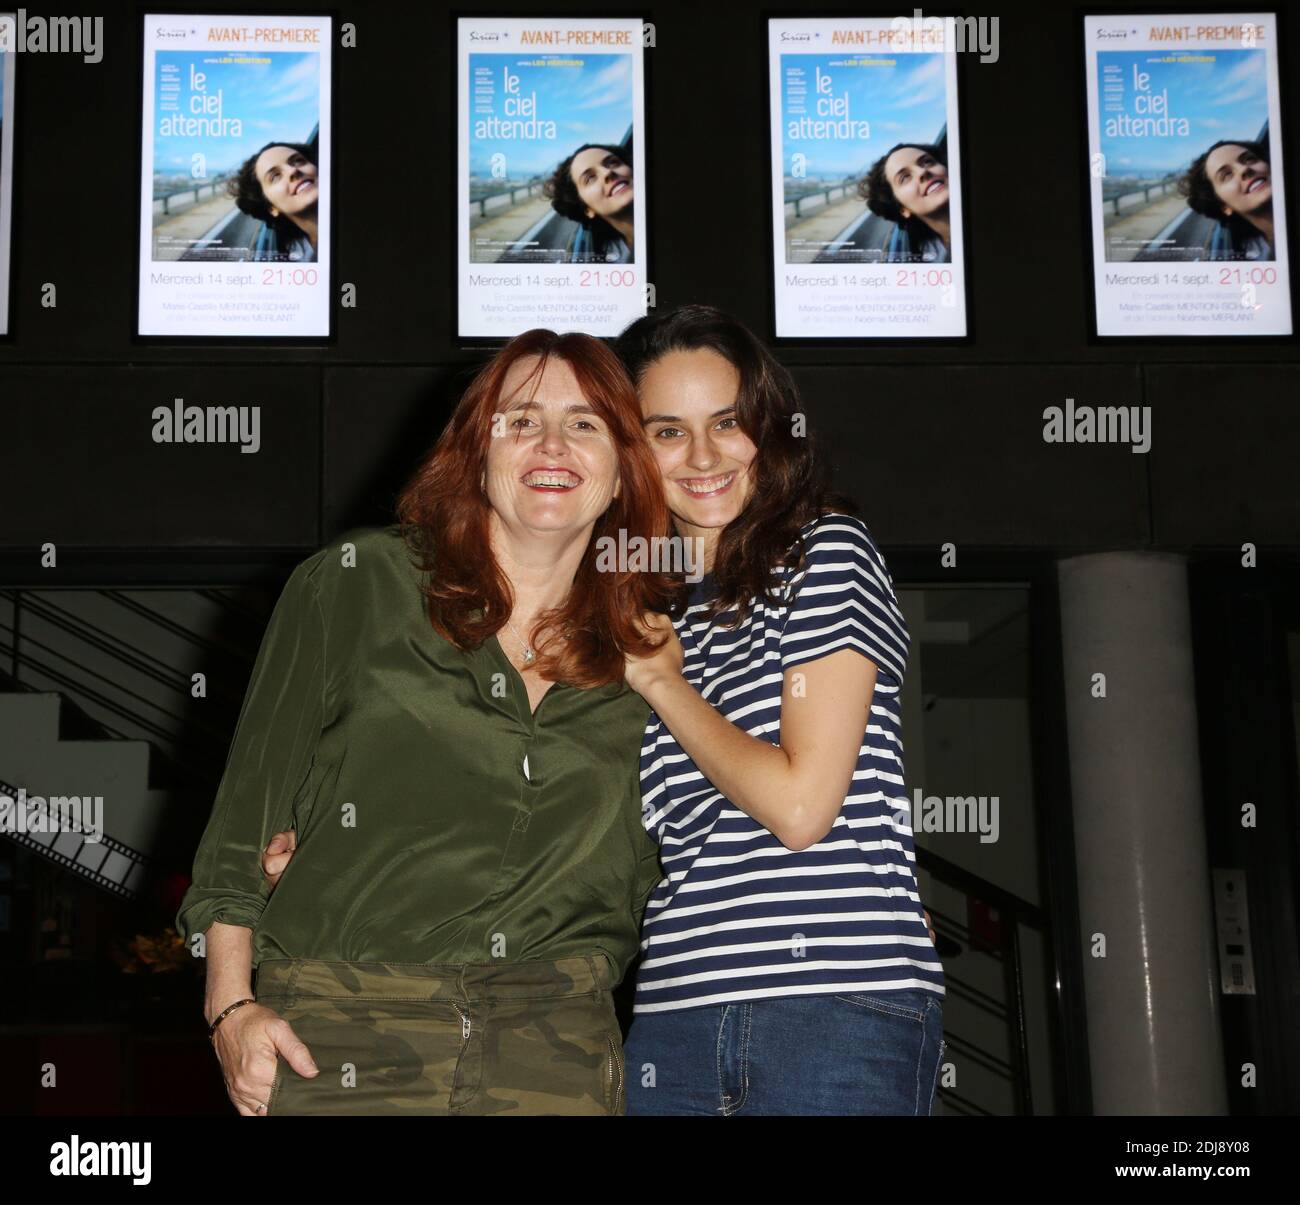 Exclusive - Marie-Castille Mention-Schaar and Noemie Merlant attending 'Le  ciel attendra' Premiere during Positive Economy Forum by Positive Planet on  September 14, 2016 in Le Havre, France. Photo by Jerome  Domine/ABACAPRESS.COM Stock